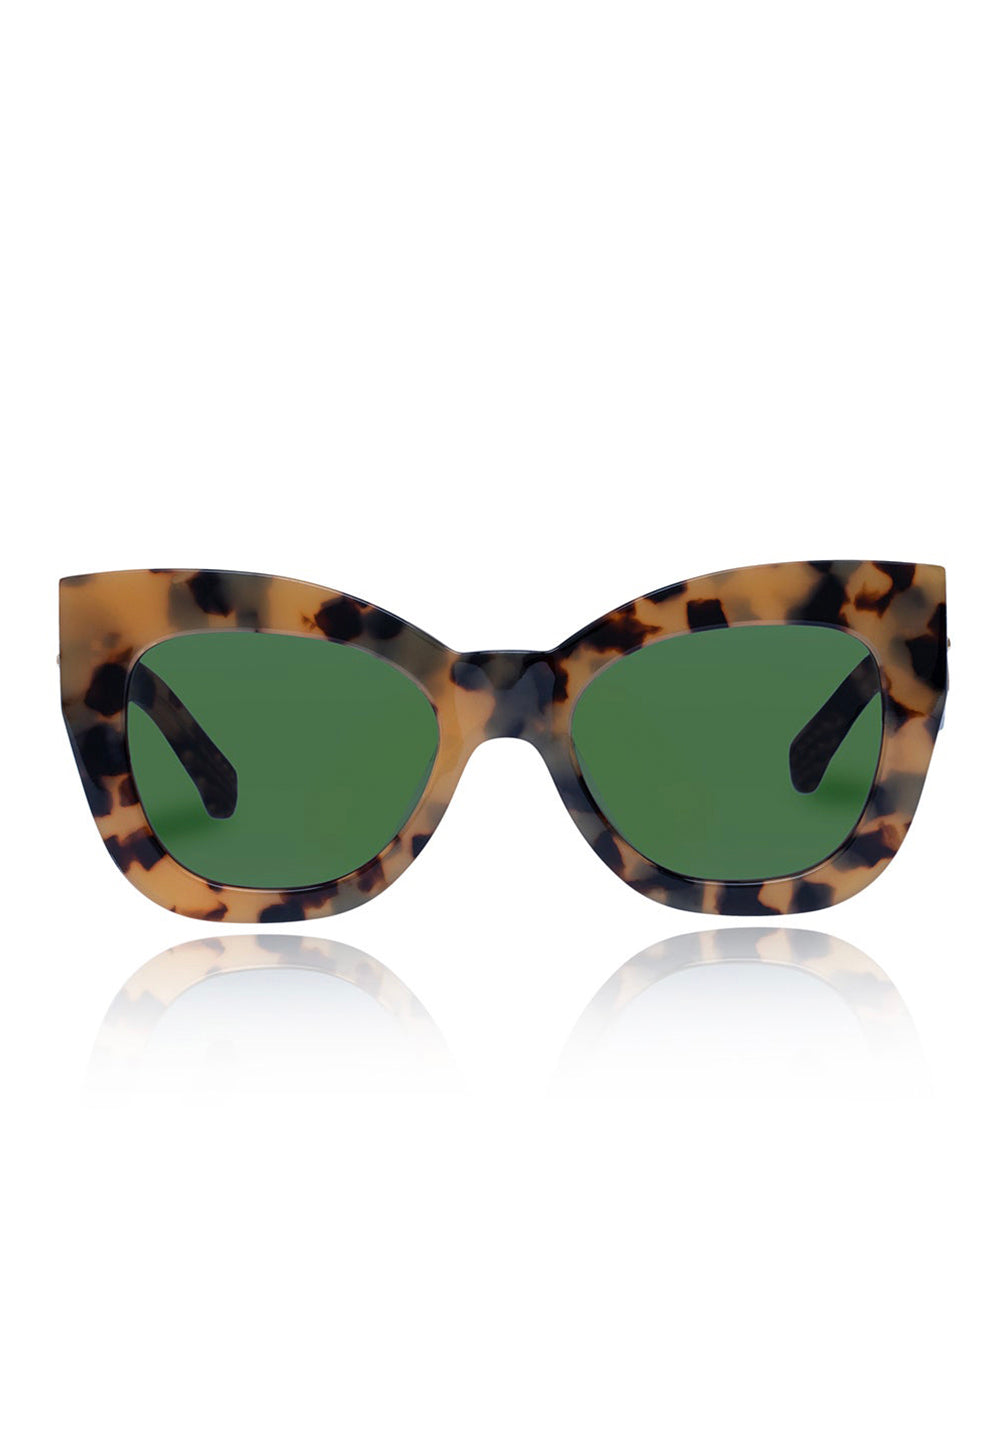 Northern Lights Sunglasses - Crazy Tort sold by Angel Divine